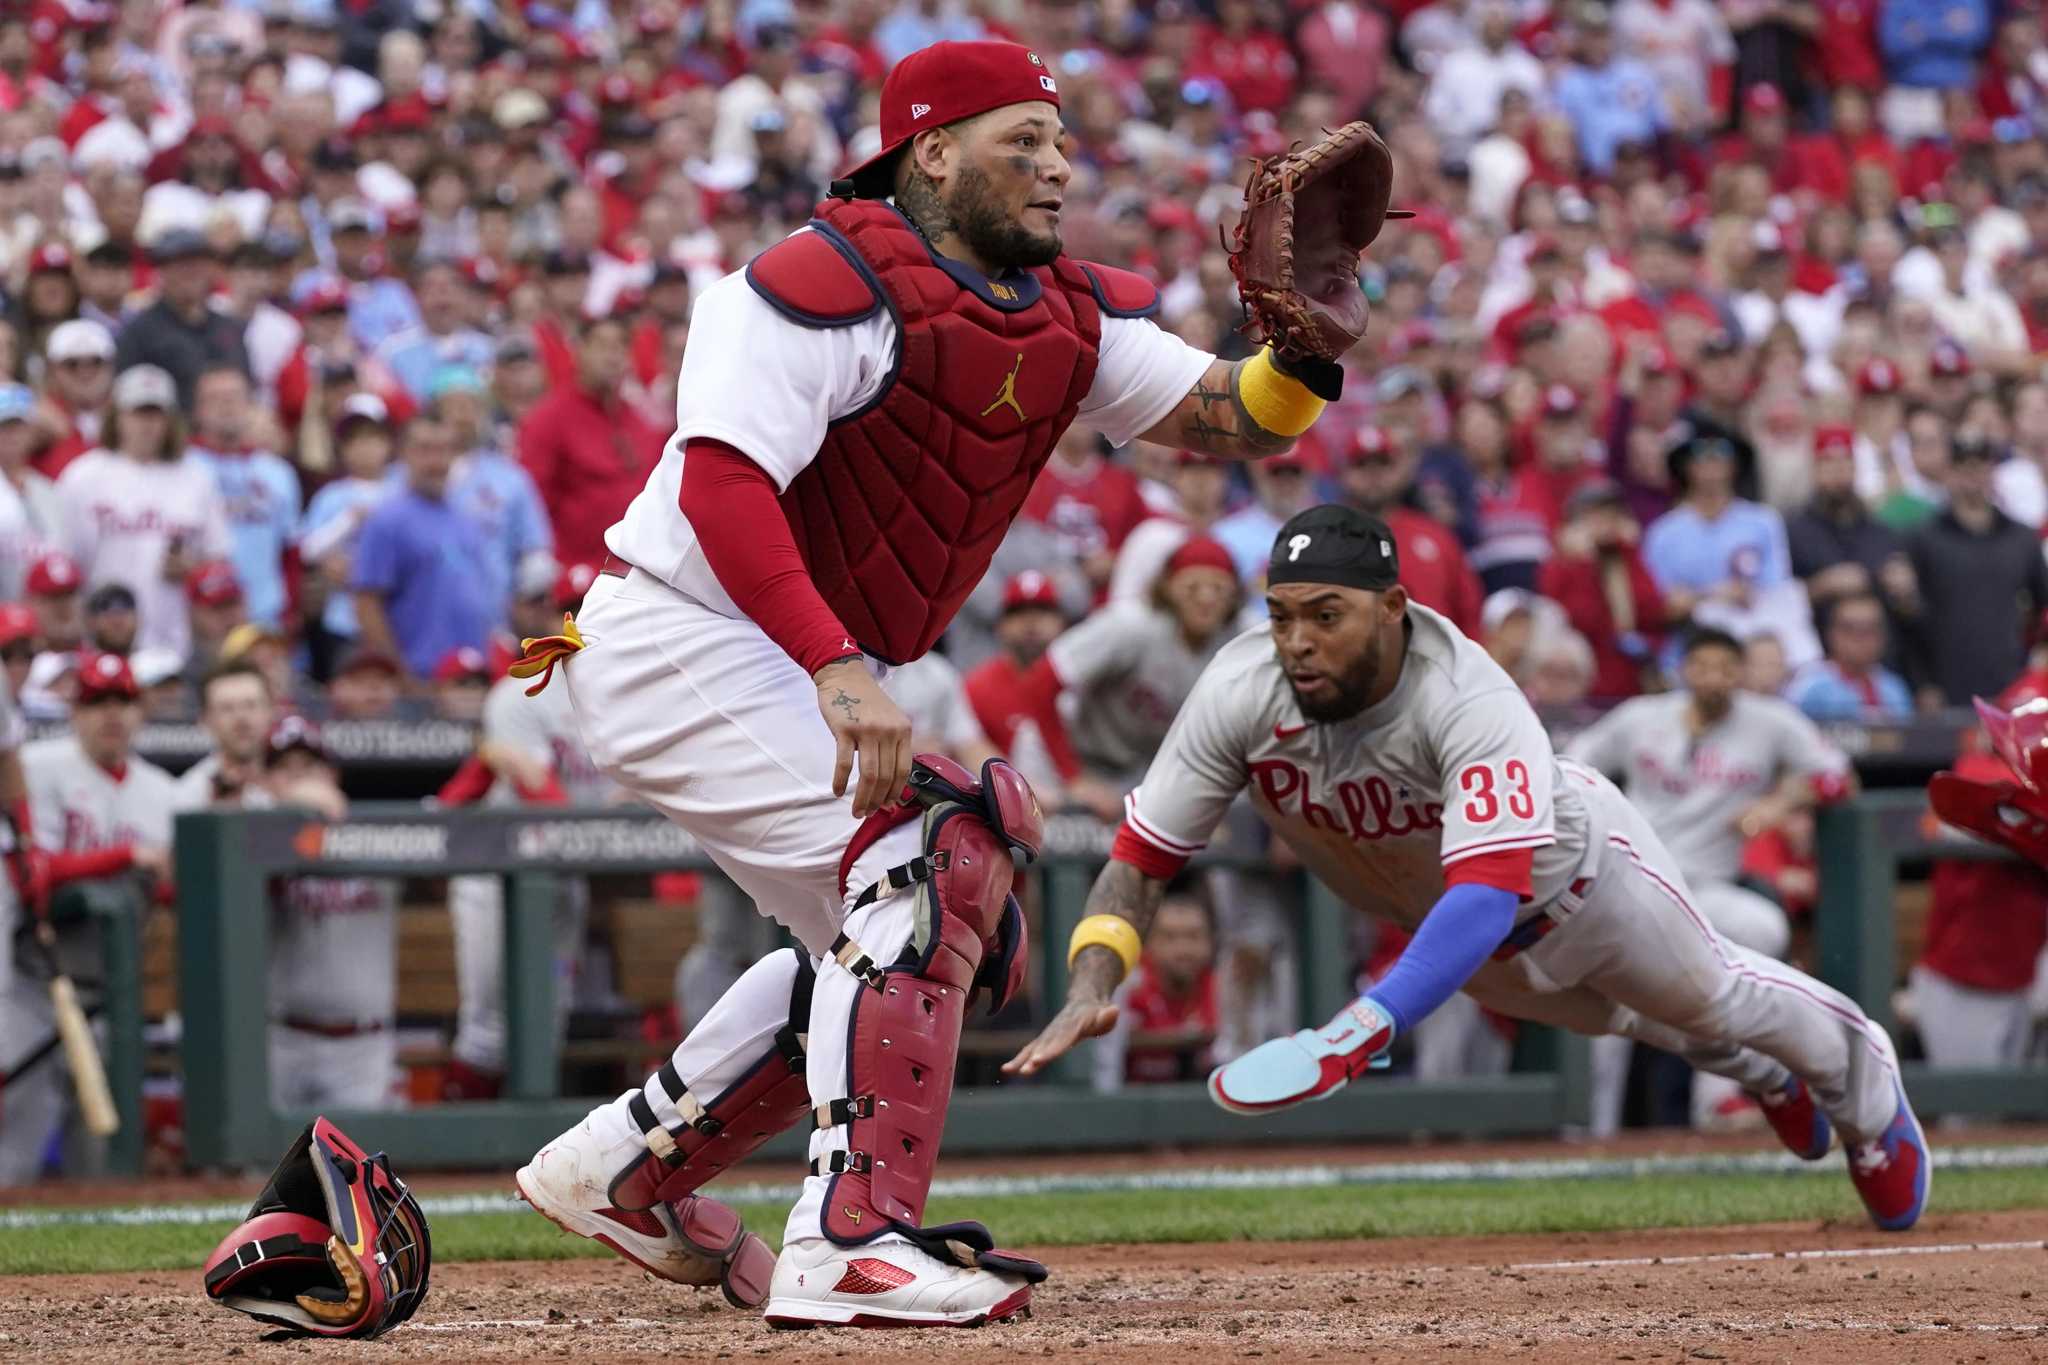 In the interim, Thomson leads Phillies to brink of playoffs